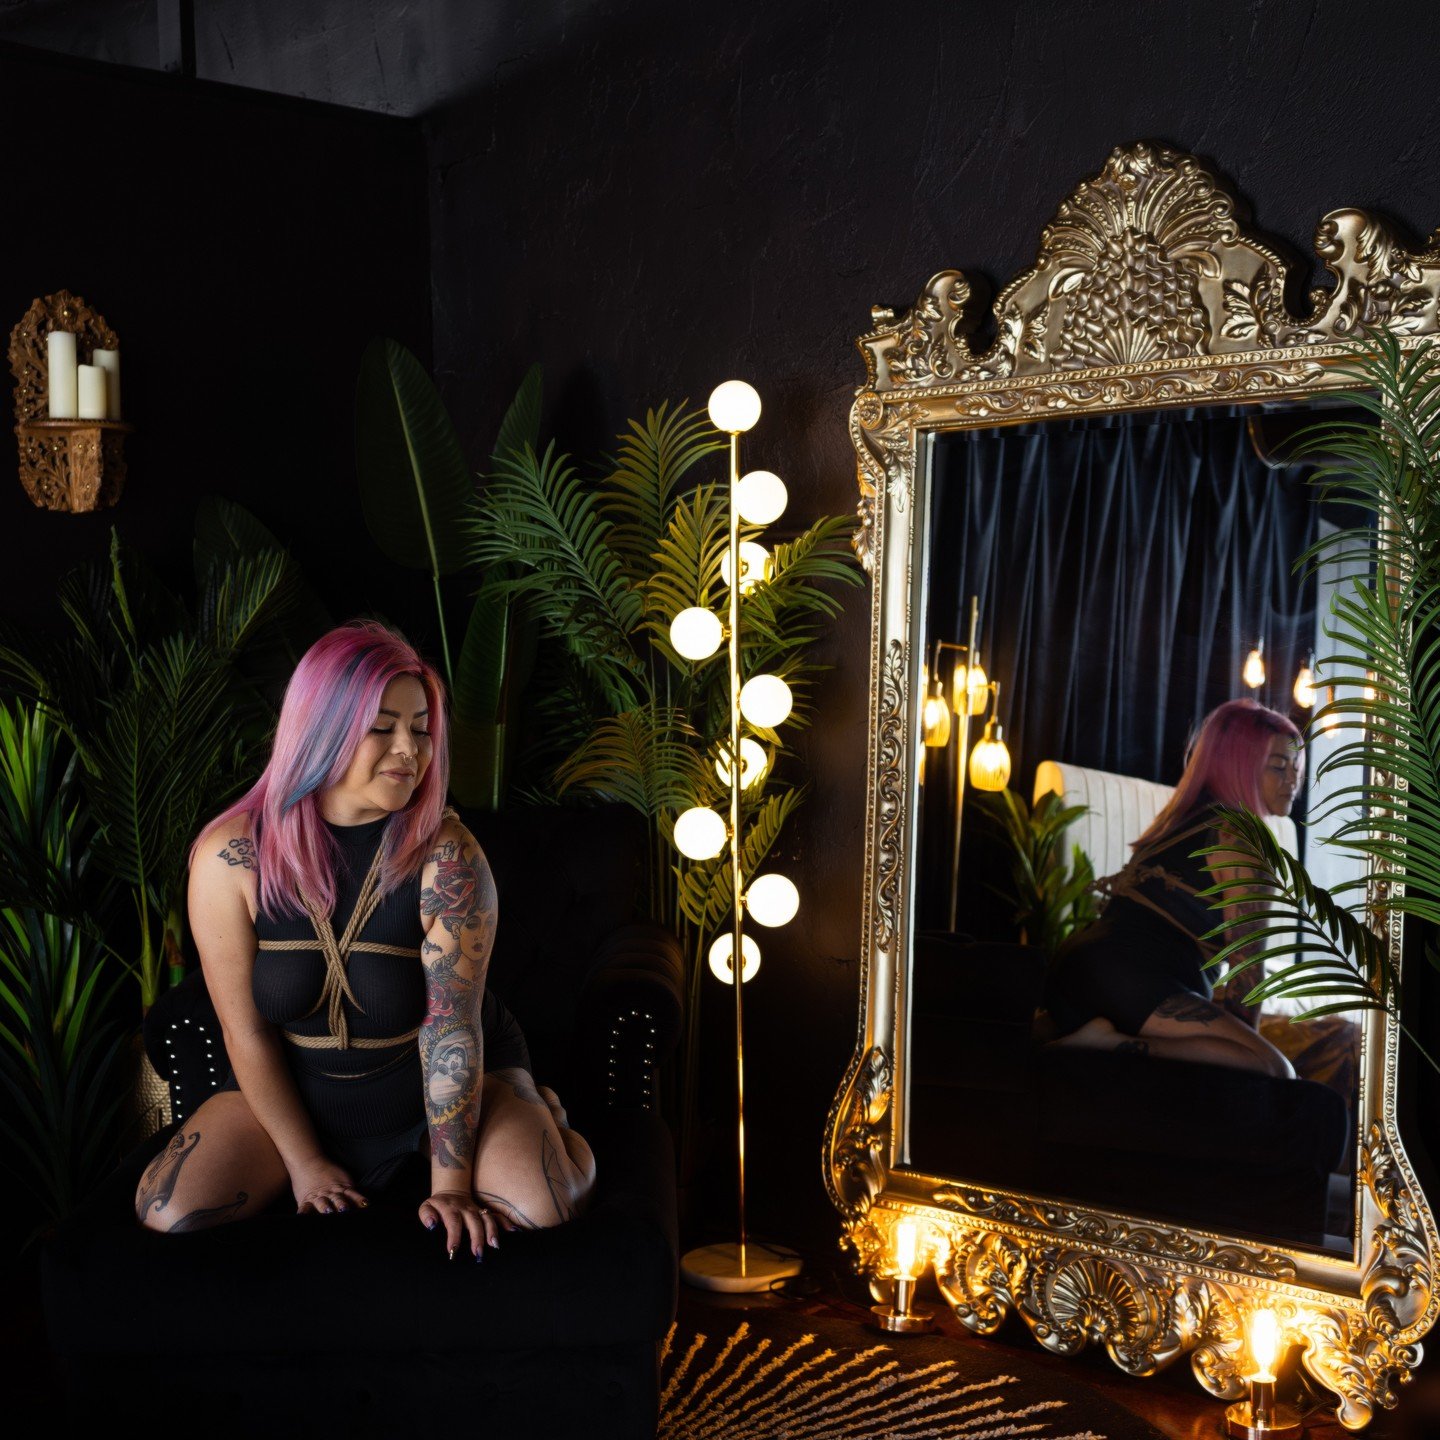 Who says boudoir is all about lingerie? Sometimes, it's about the allure of the unexpected. Embrace your unique style and sensuality in any form that speaks to you. Whether it's a little black dress or the intricate art of shibari, the essence of bou